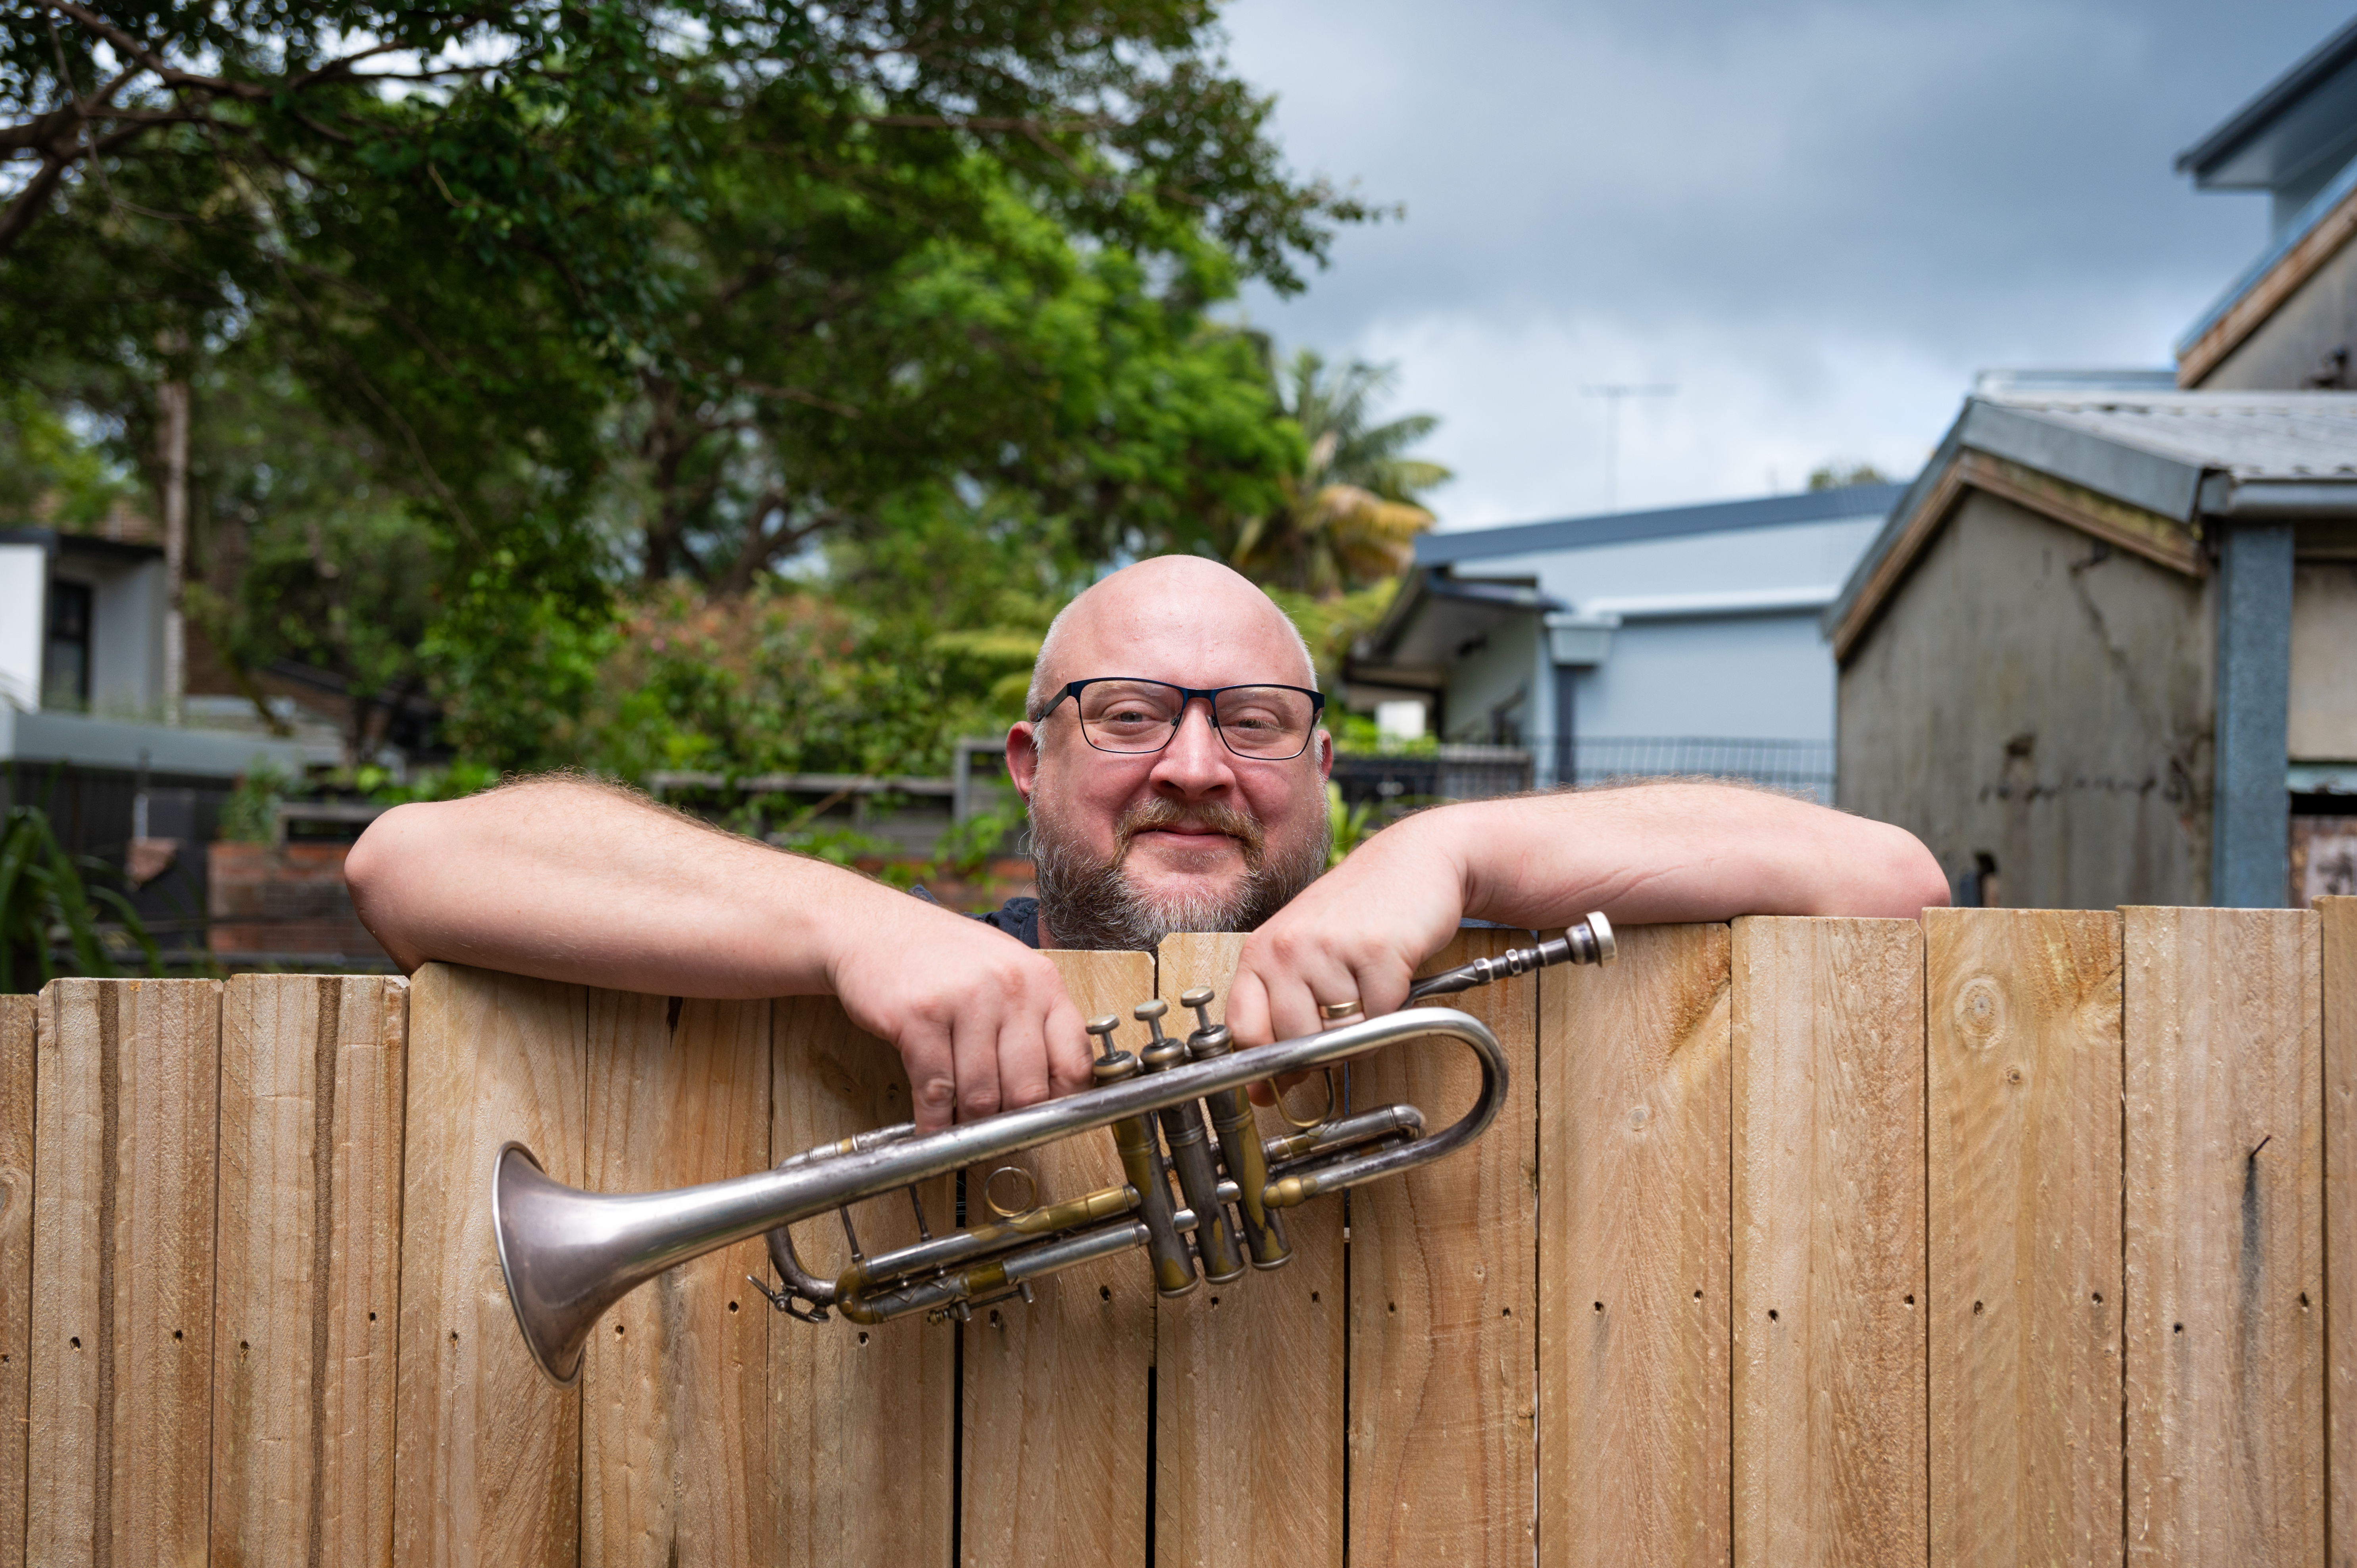 A man looking over a fence, holding a trumpet